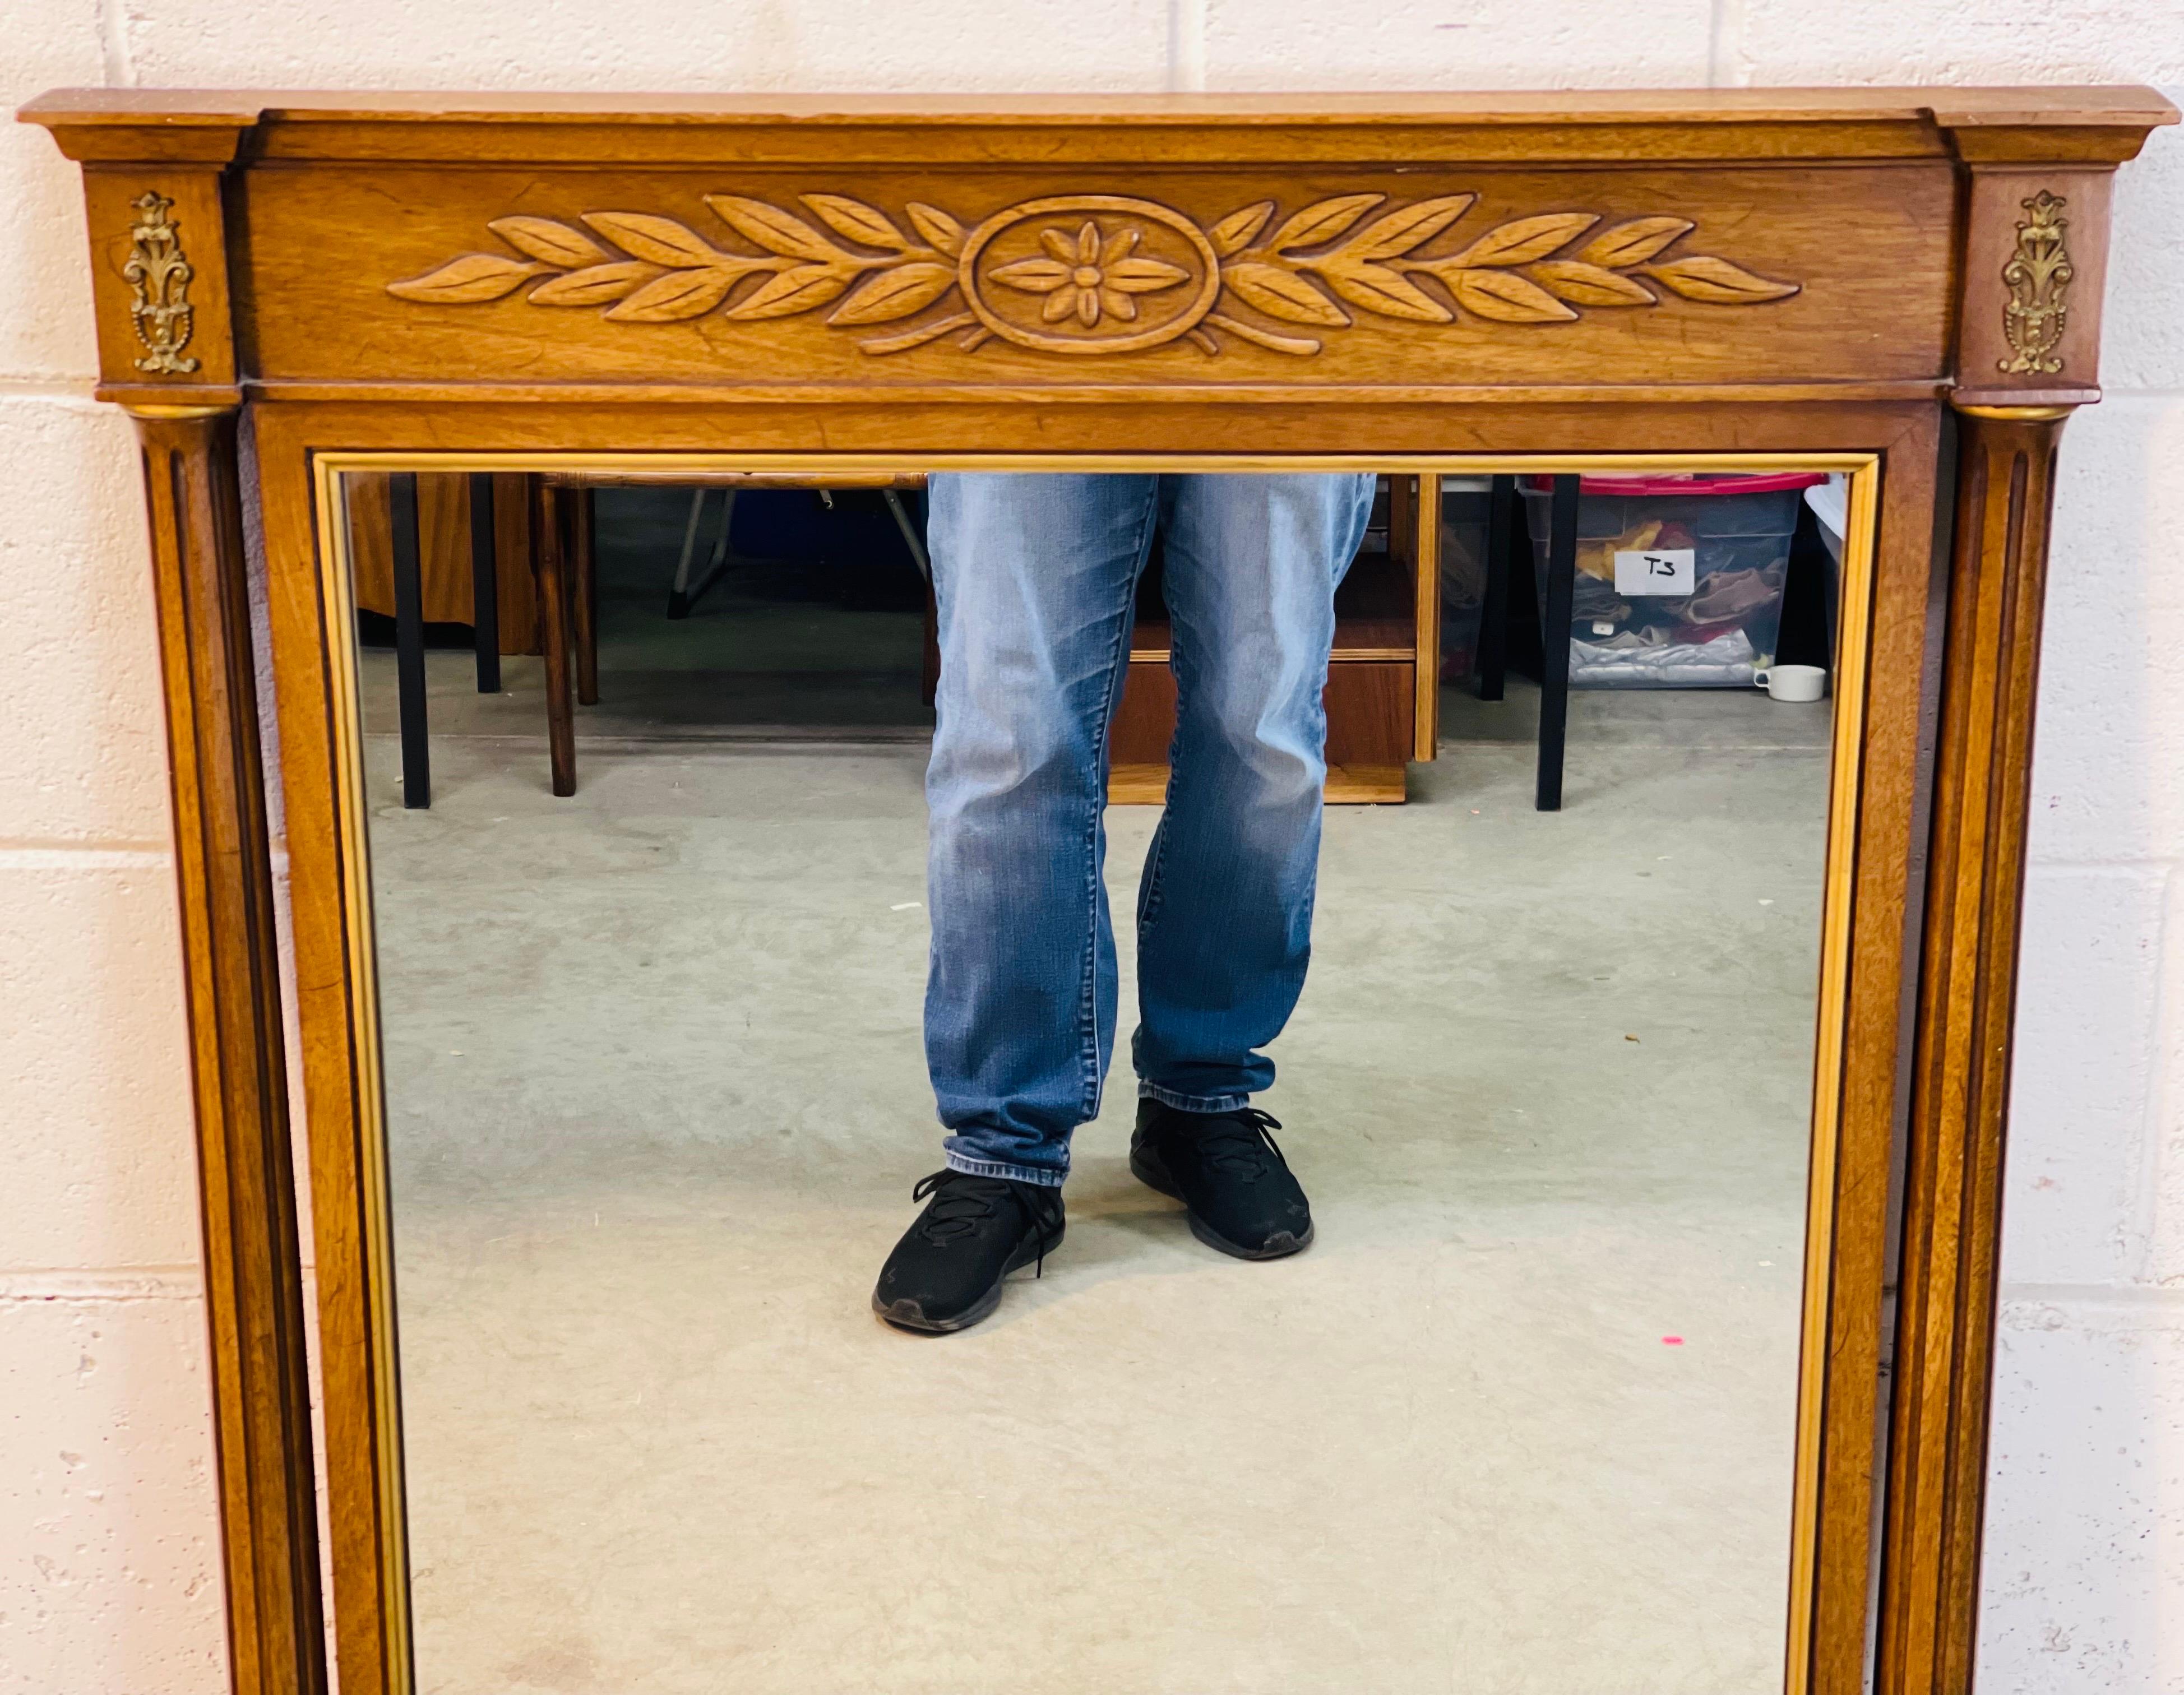 Vintage 1970s wall mirror with column accents and gold leaf design. The mirror is in elm wood and has gold accents around all edges. Hooks provided. No marks.